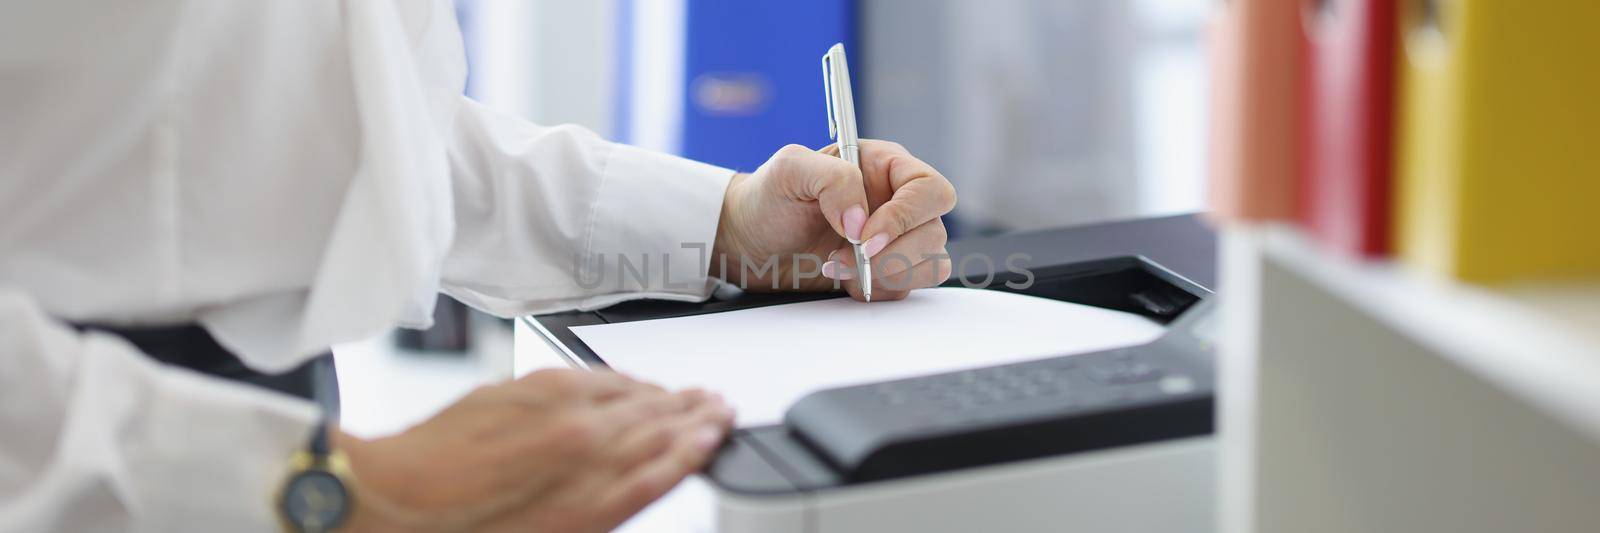 Close-up of female secretary or office worker print papers on printer machine. Company employee in suit fill document on device. Office life, job concept